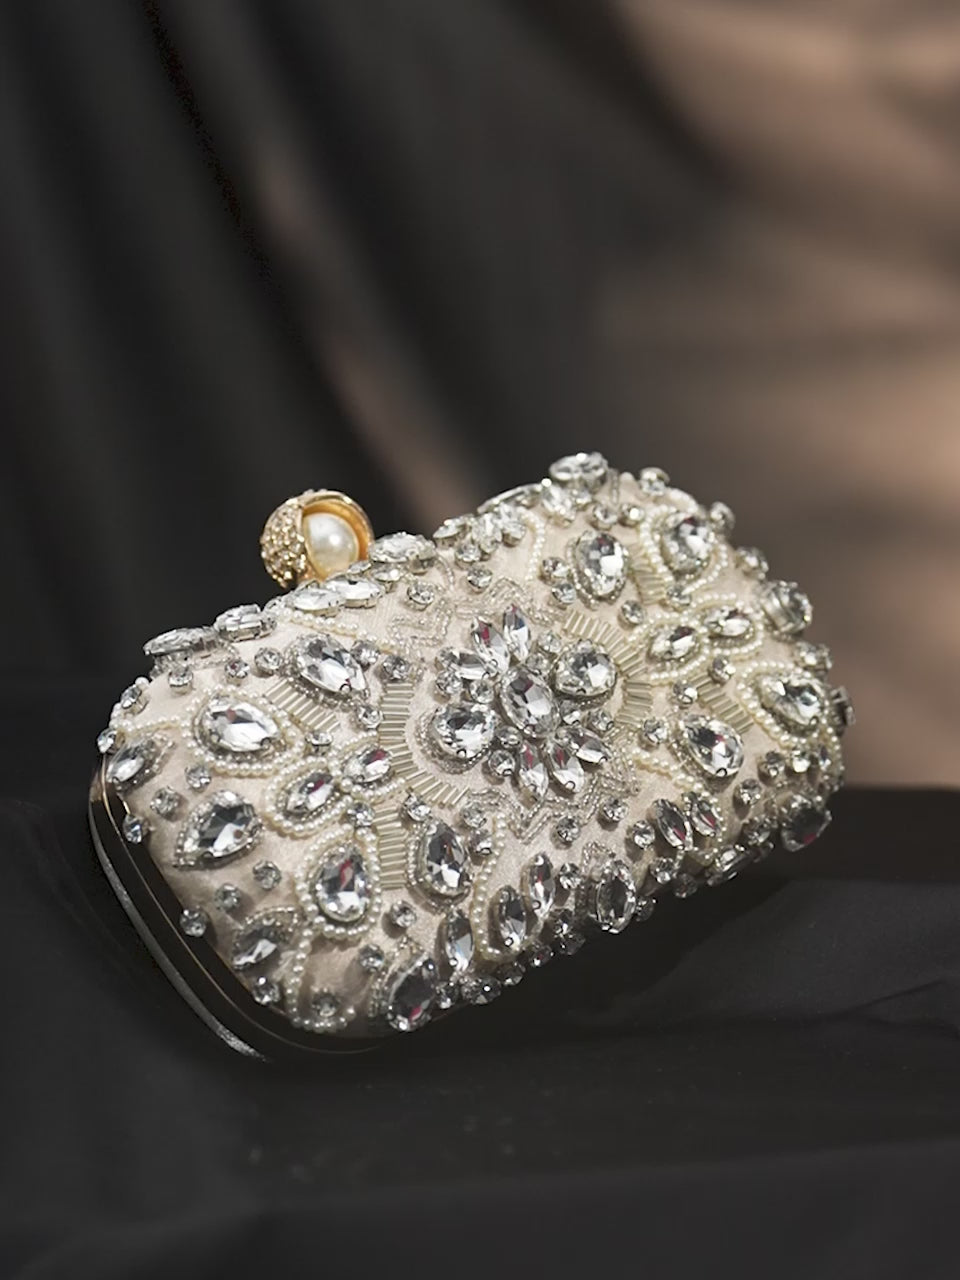 Rubans Pink bag studded with bold crystals exquisite clutch handbag